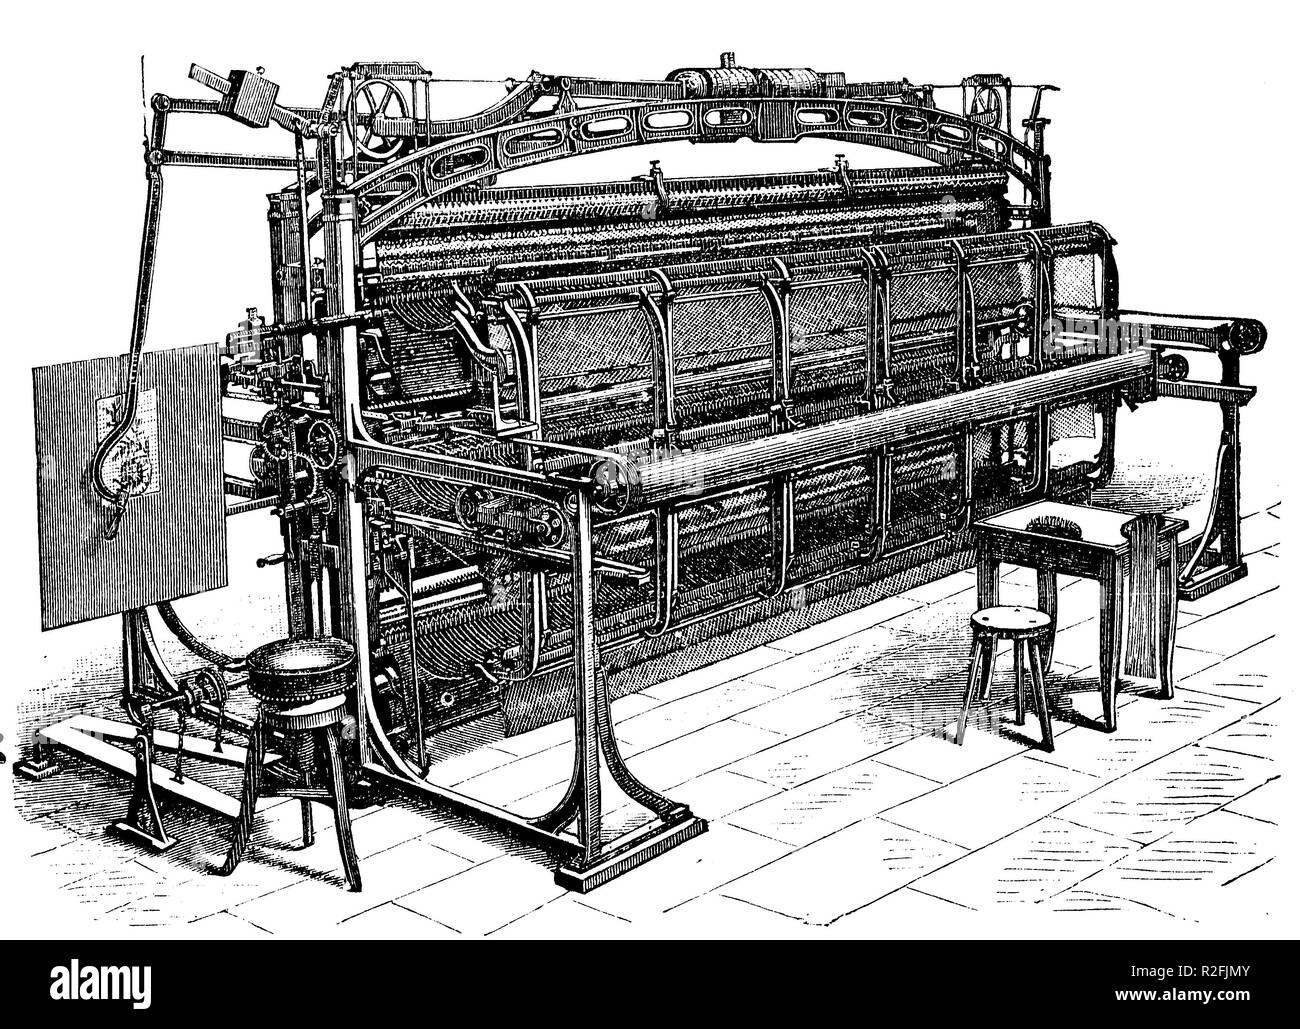 Digital improved reproduction, Knitting machine, produced by Heilmann, 1888, from an original print from the 19th century Stock Photo